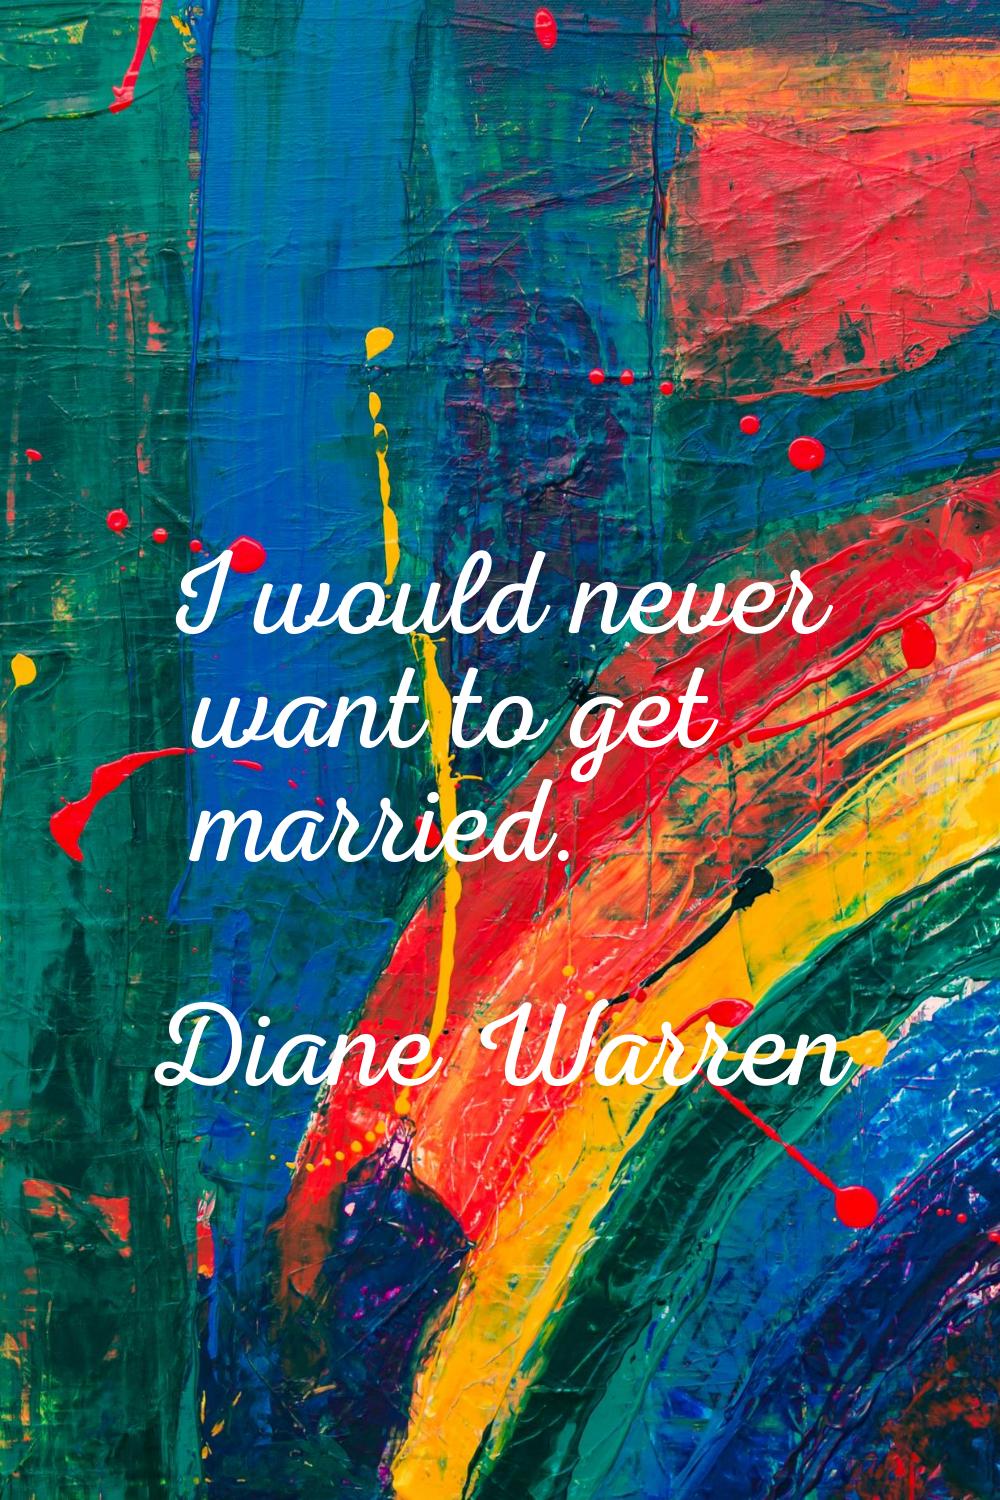 I would never want to get married.